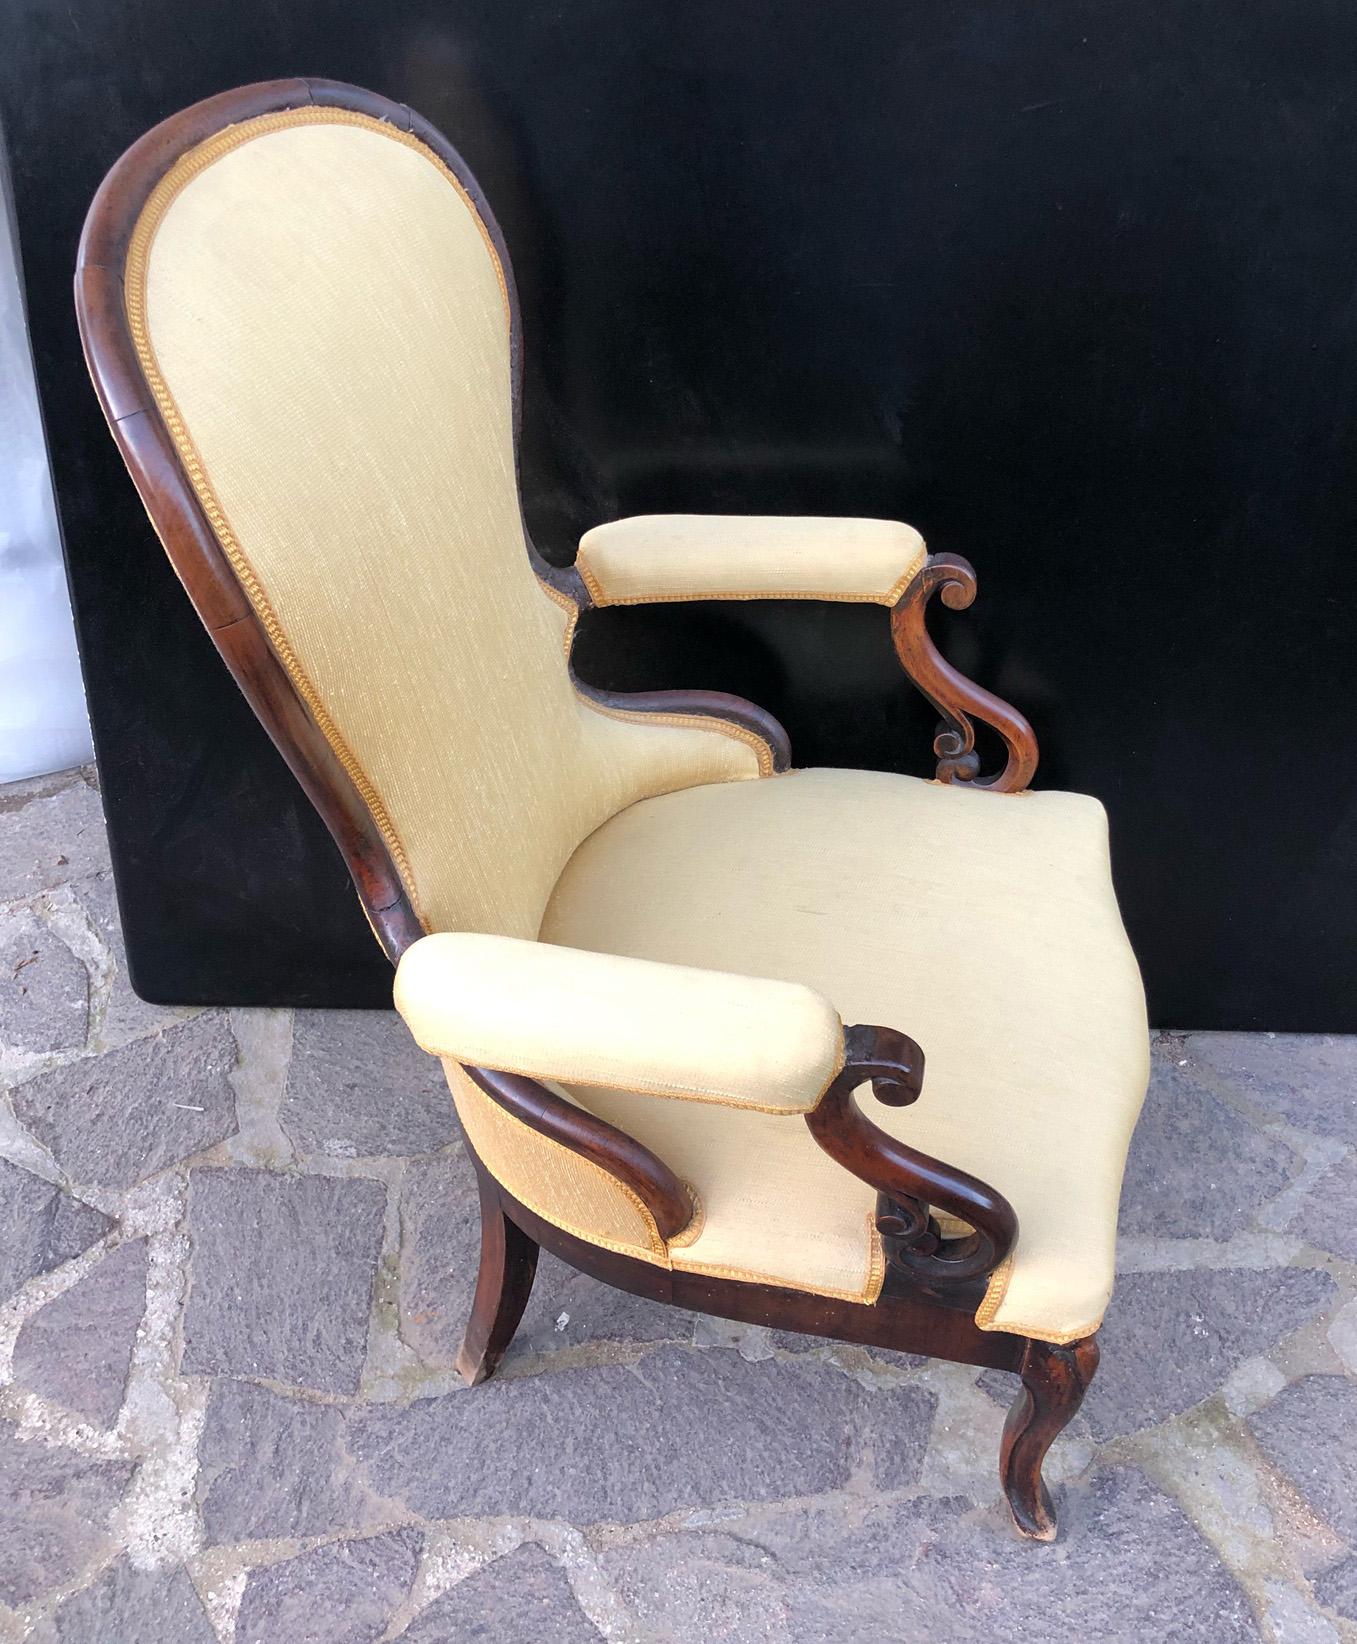 Mid-19th Century Uncommon Italian Armchair in Solid Walnut with New Upholstery For Sale